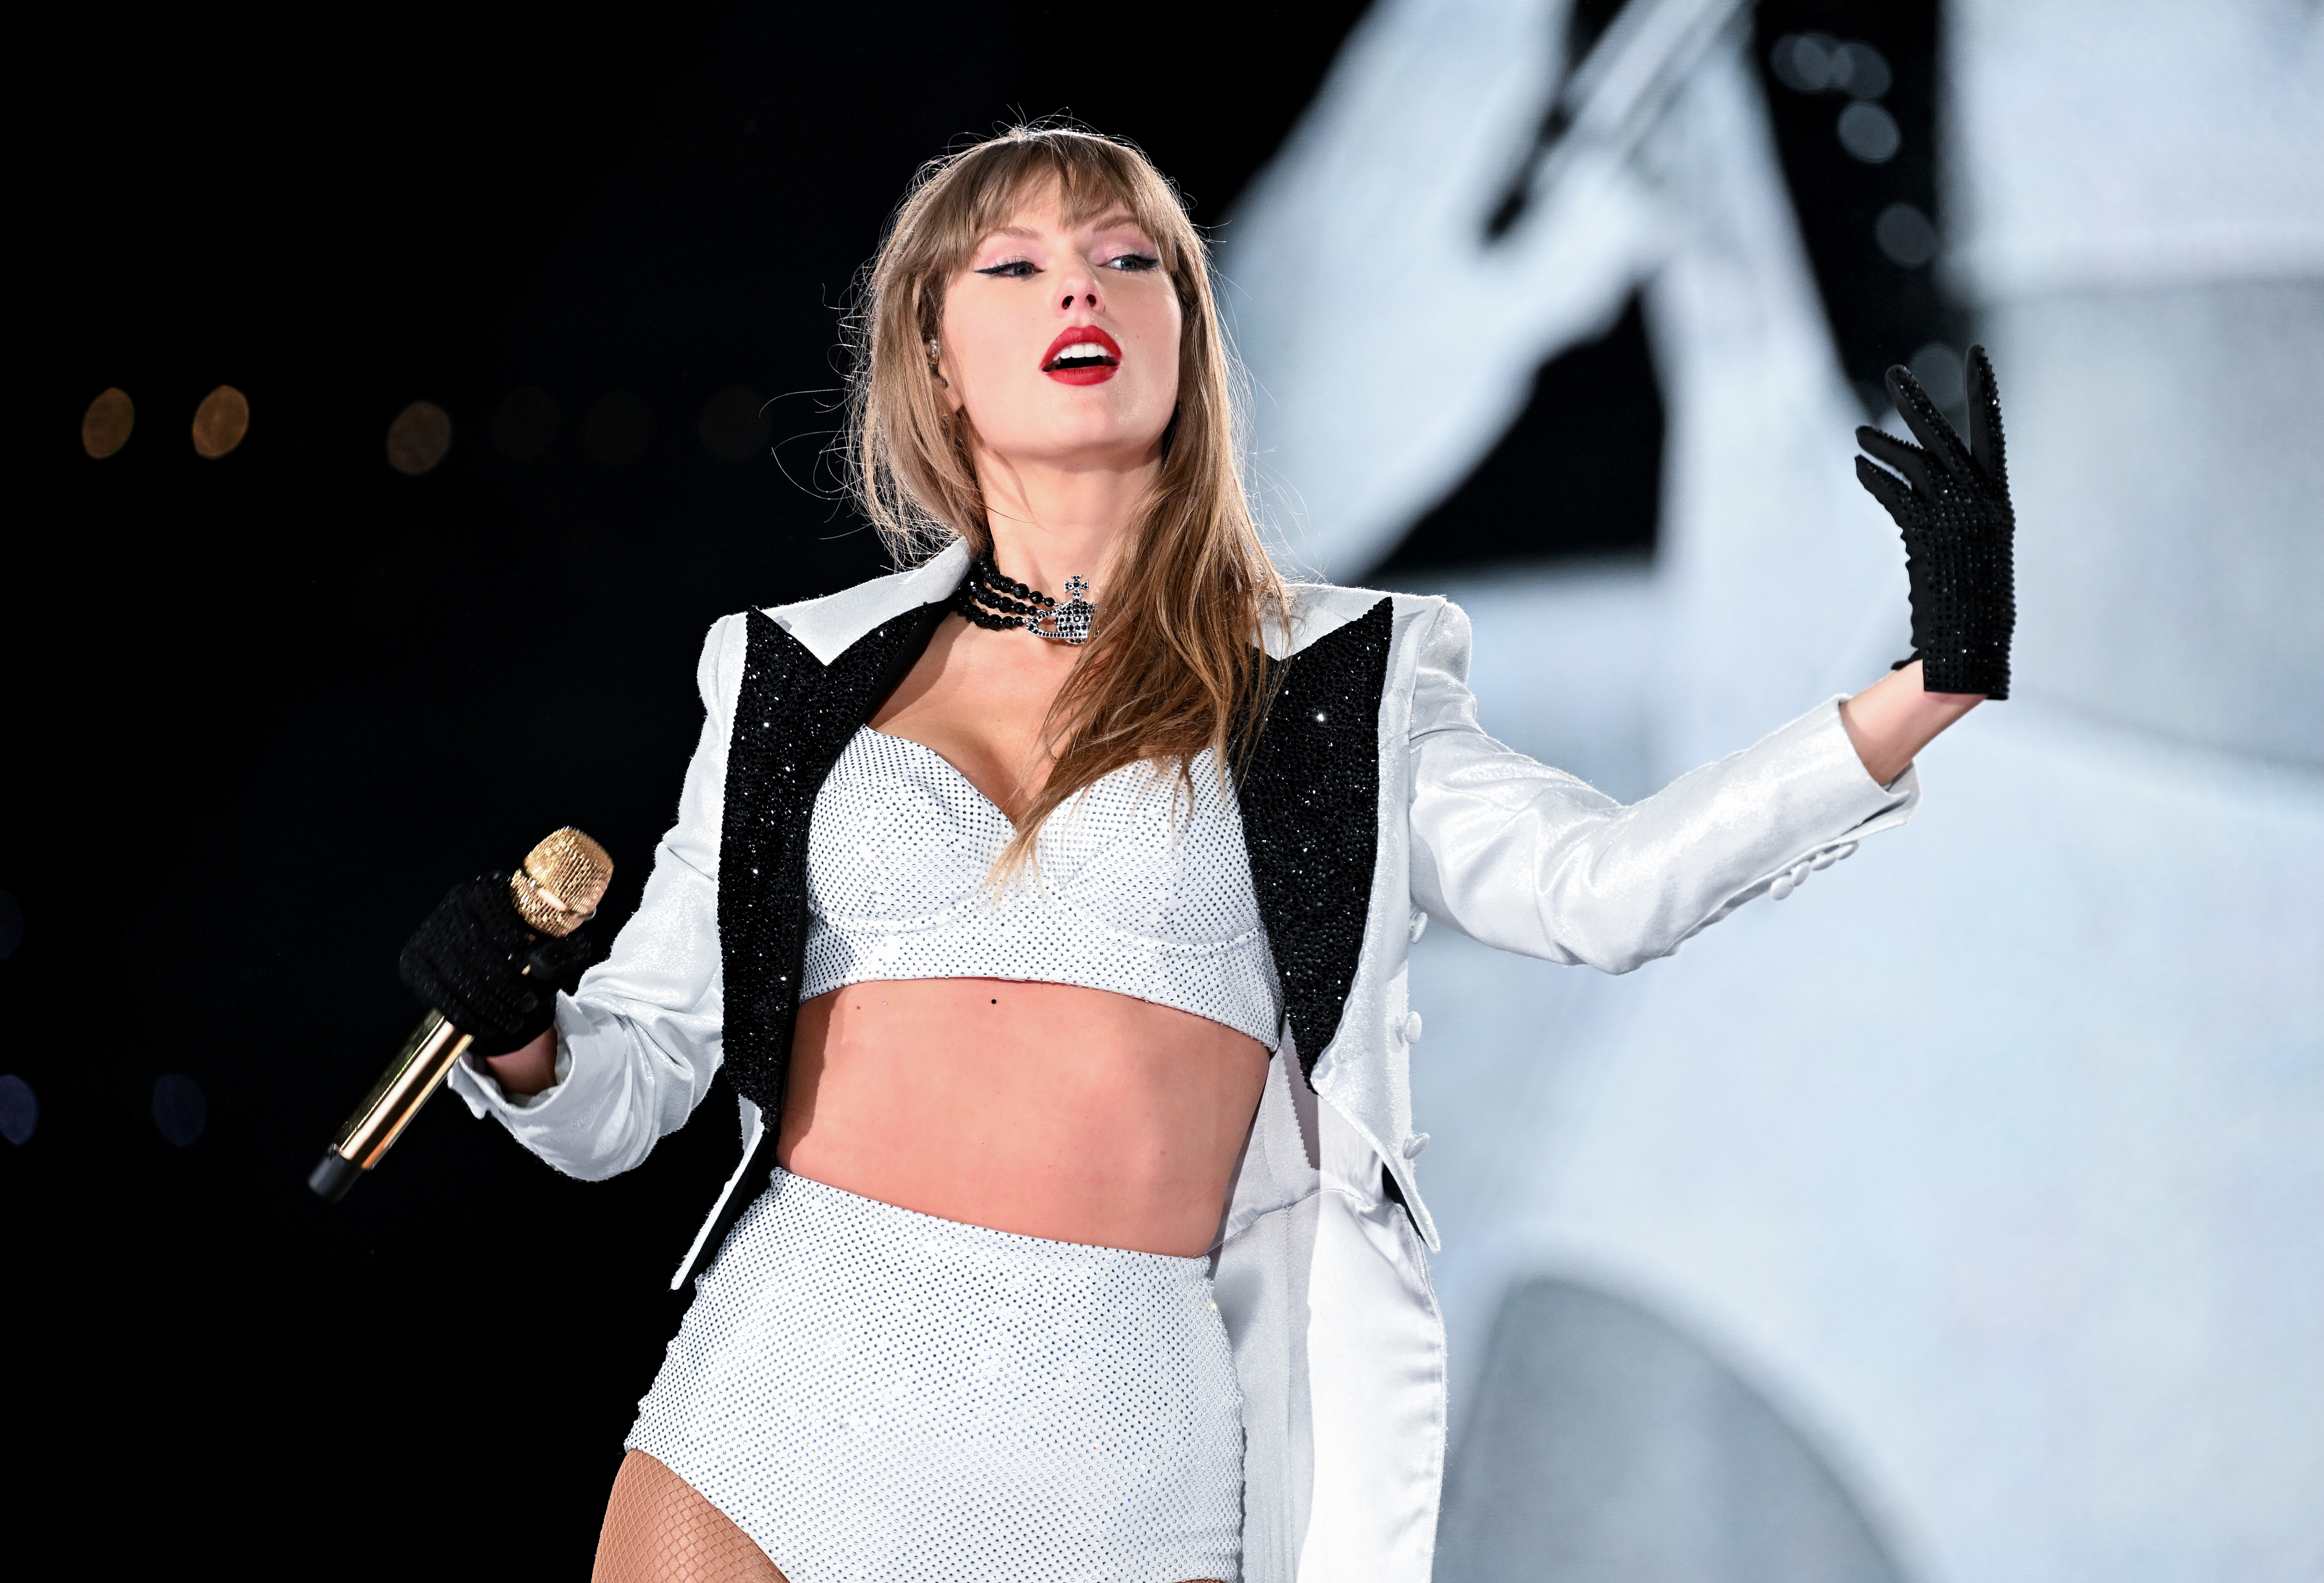 Taylor Swift performs on stage wearing a crop top and high-waisted shorts with a blazer and black gloves. She holds a gold microphone